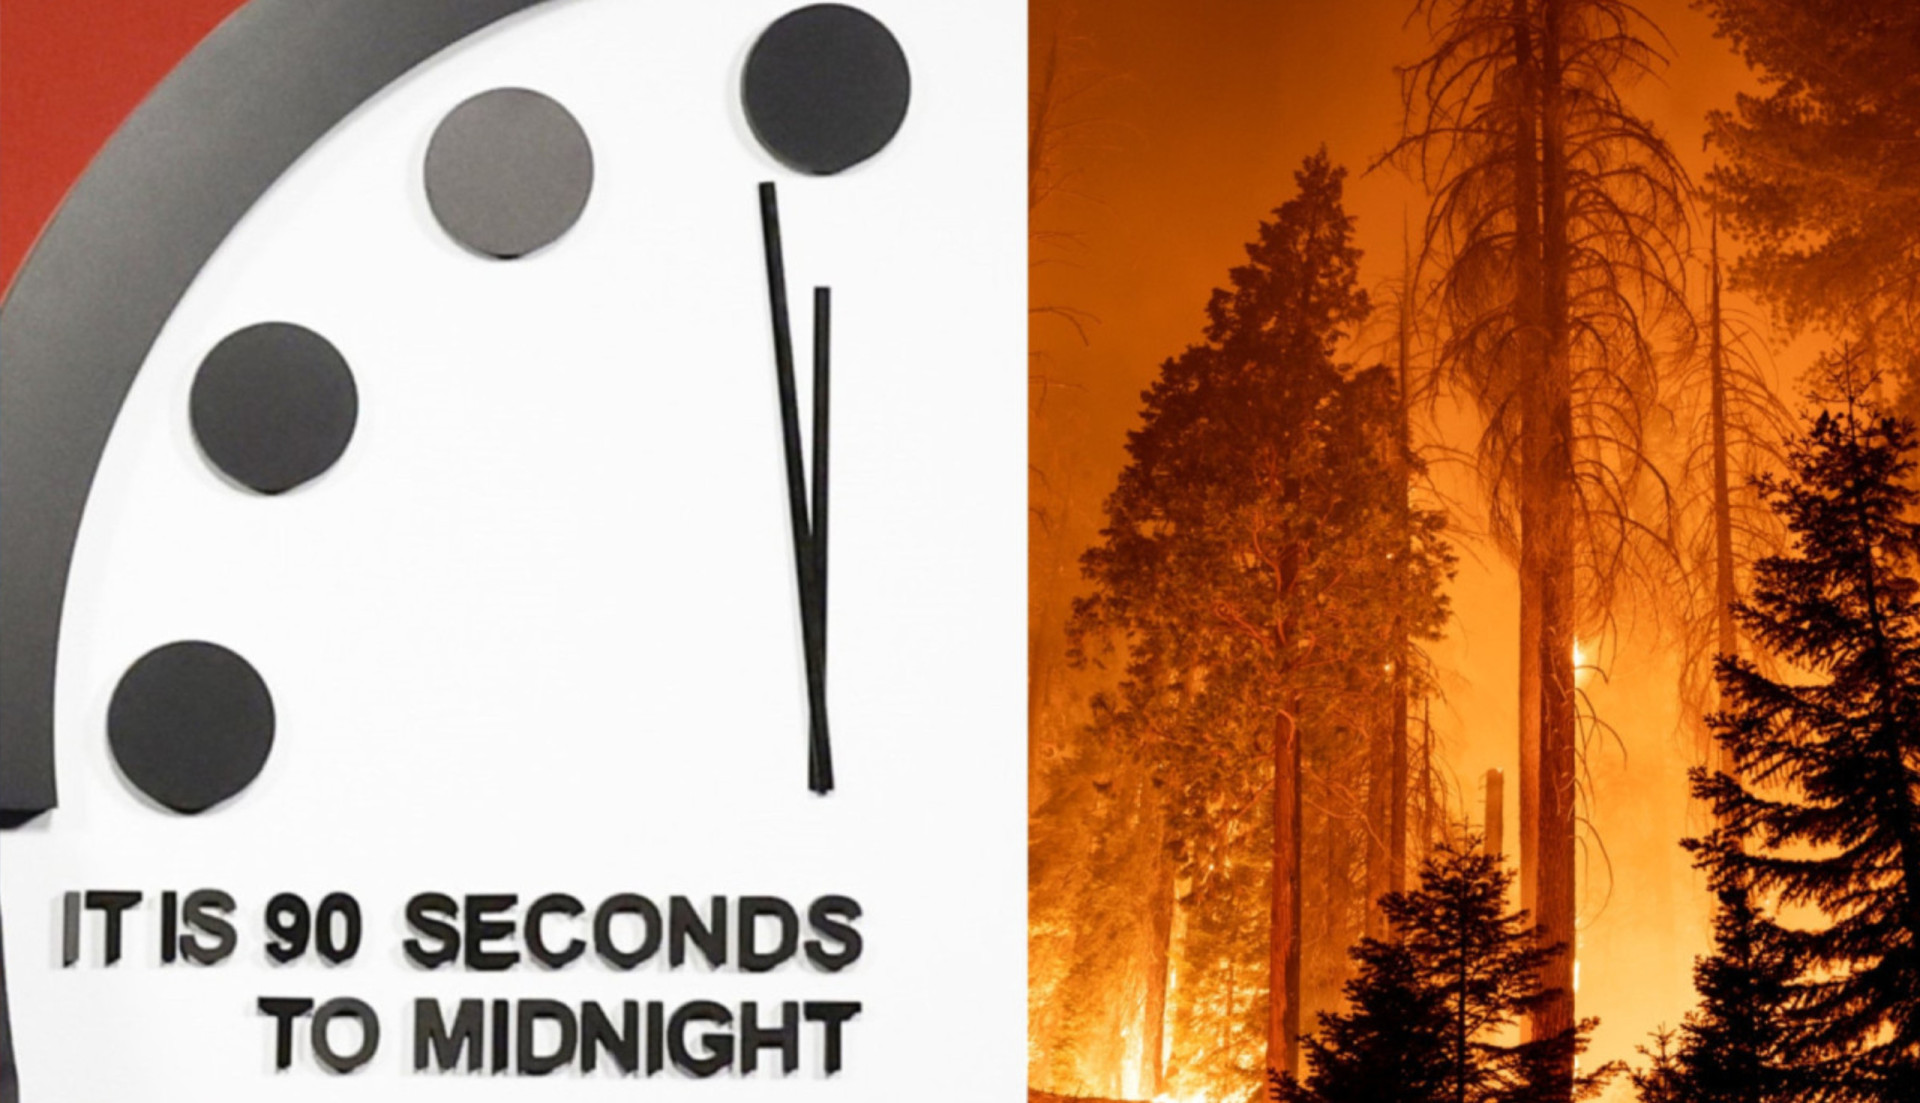 <p>The Doomsday Clock continues to inch closer to the apocalypse over climate change and fears of nuclear war. The year 2024 has brought yet another dire warning issued by the Bulletin of the Atomic Scientists. But what is the Doomsday Clock, and how is it read?</p> <p>To summarize, the clock was developed by scientists in 1947 to track the likelihood of mankind doing something that brings about the end of the world. The development of nuclear weapons and the rapid progression of climate change are two things that have moved the clock's hand closer to midnight, which in this case, marks Armageddon. After the end of the Cold War, the clock was 17 minutes away from midnight, but in recent years, we've gone from counting down the minutes to counting down the seconds. In 2024, the Bulletin left the clock at the same position as last year—90 seconds to midnight.</p> <p>"Conflict hot spots around the world carry the threat of nuclear escalation, climate change is already causing death and destruction, and disruptive technologies like AI and biological research advance faster than their safeguards," Rachel Bronson, the Bulletin's president and CEO, told Reuters. She clarified that leaving the clock unchanged is "not an indication that the world is stable," considering how disastrously close we already are to midnight. </p> <p>Click through the gallery to learn more about the Doomsday Clock and how we've come so close to the end of the world. </p><p>You may also like:<a href="https://www.starsinsider.com/n/187642?utm_source=msn.com&utm_medium=display&utm_campaign=referral_description&utm_content=490923v3en-au"> The craziest daredevils to go over the Niagara Falls</a></p>